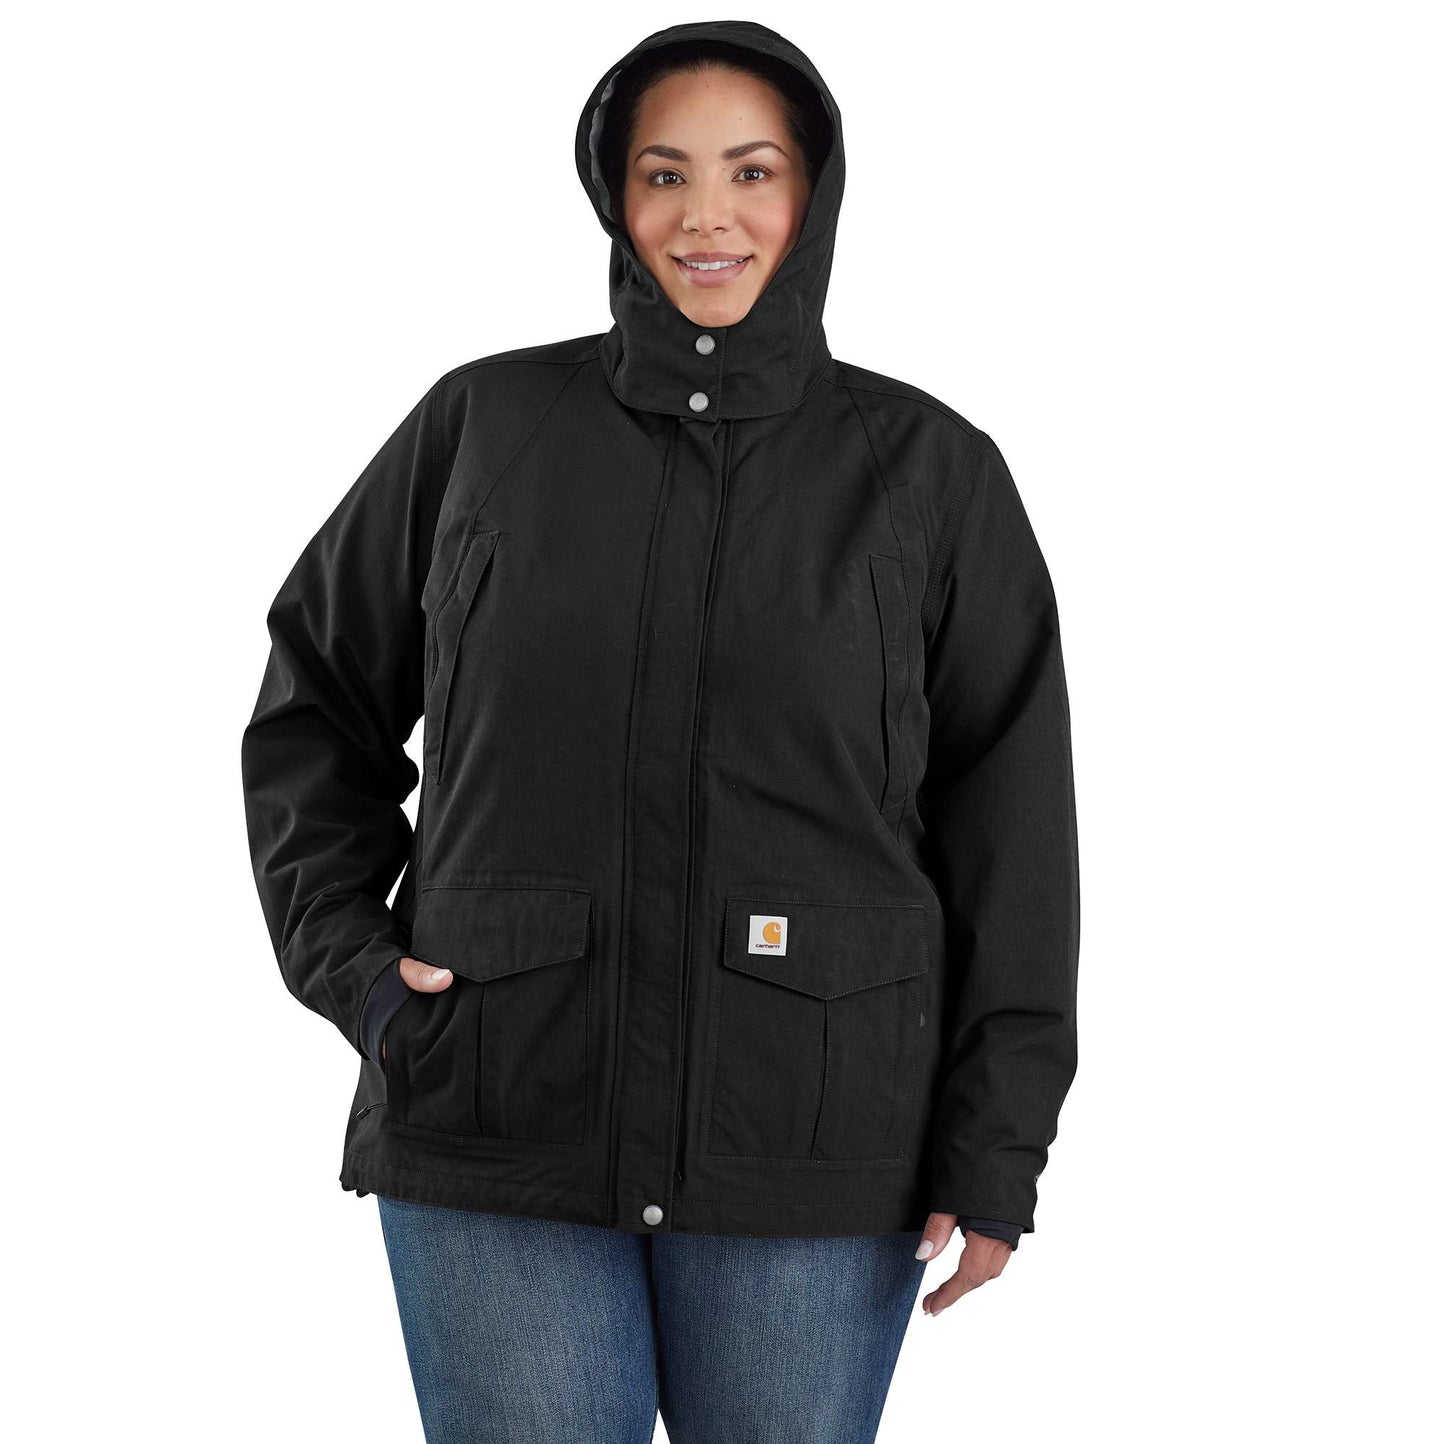 Storm Defender® Relaxed Fit Heavyweight Jacket